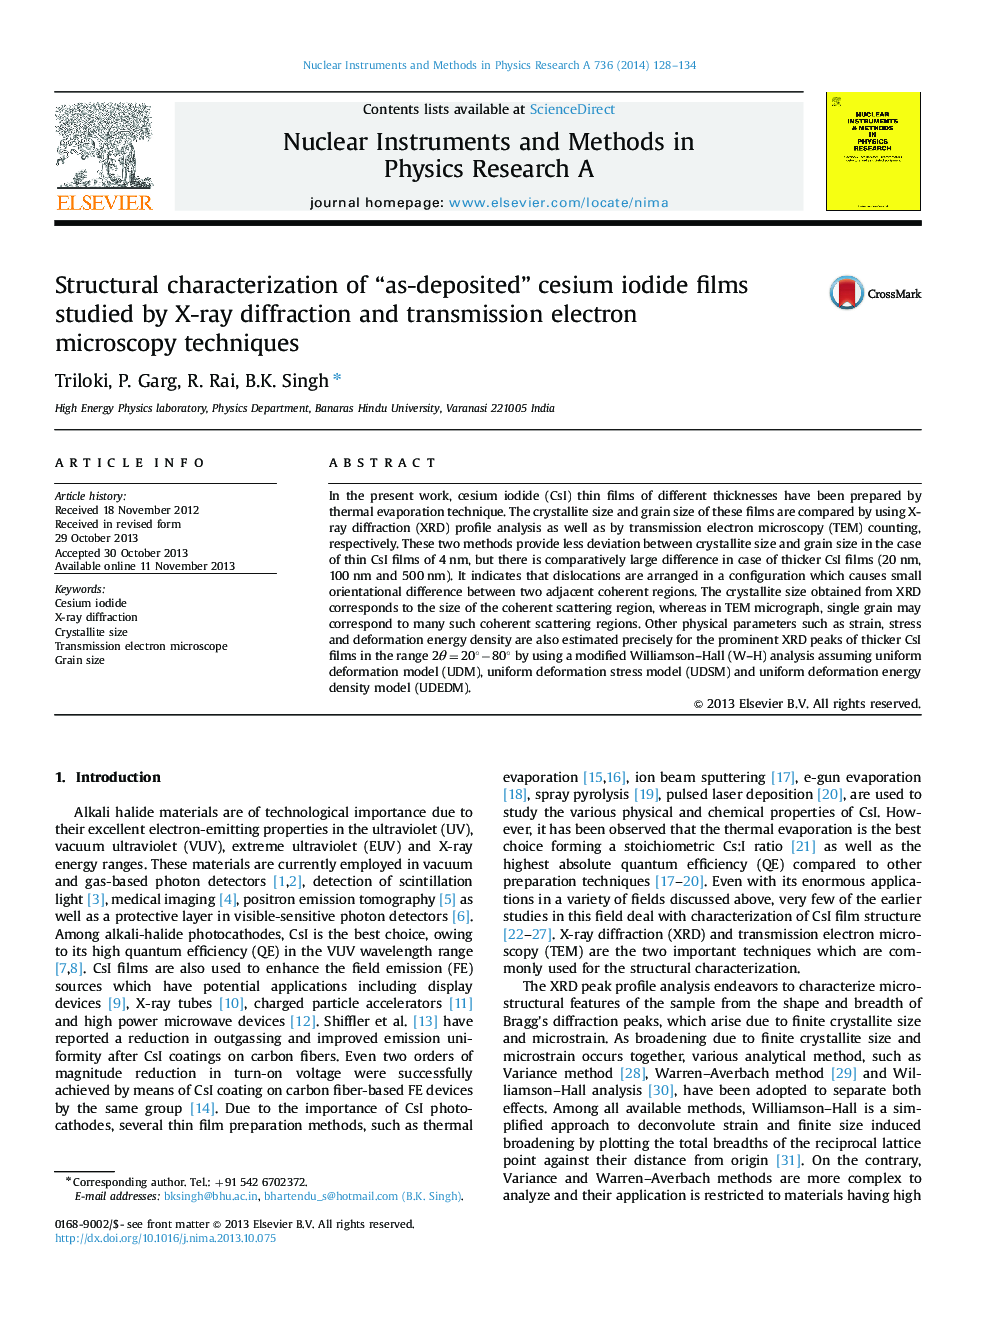 Structural characterization of “as-deposited” cesium iodide films studied by X-ray diffraction and transmission electron microscopy techniques